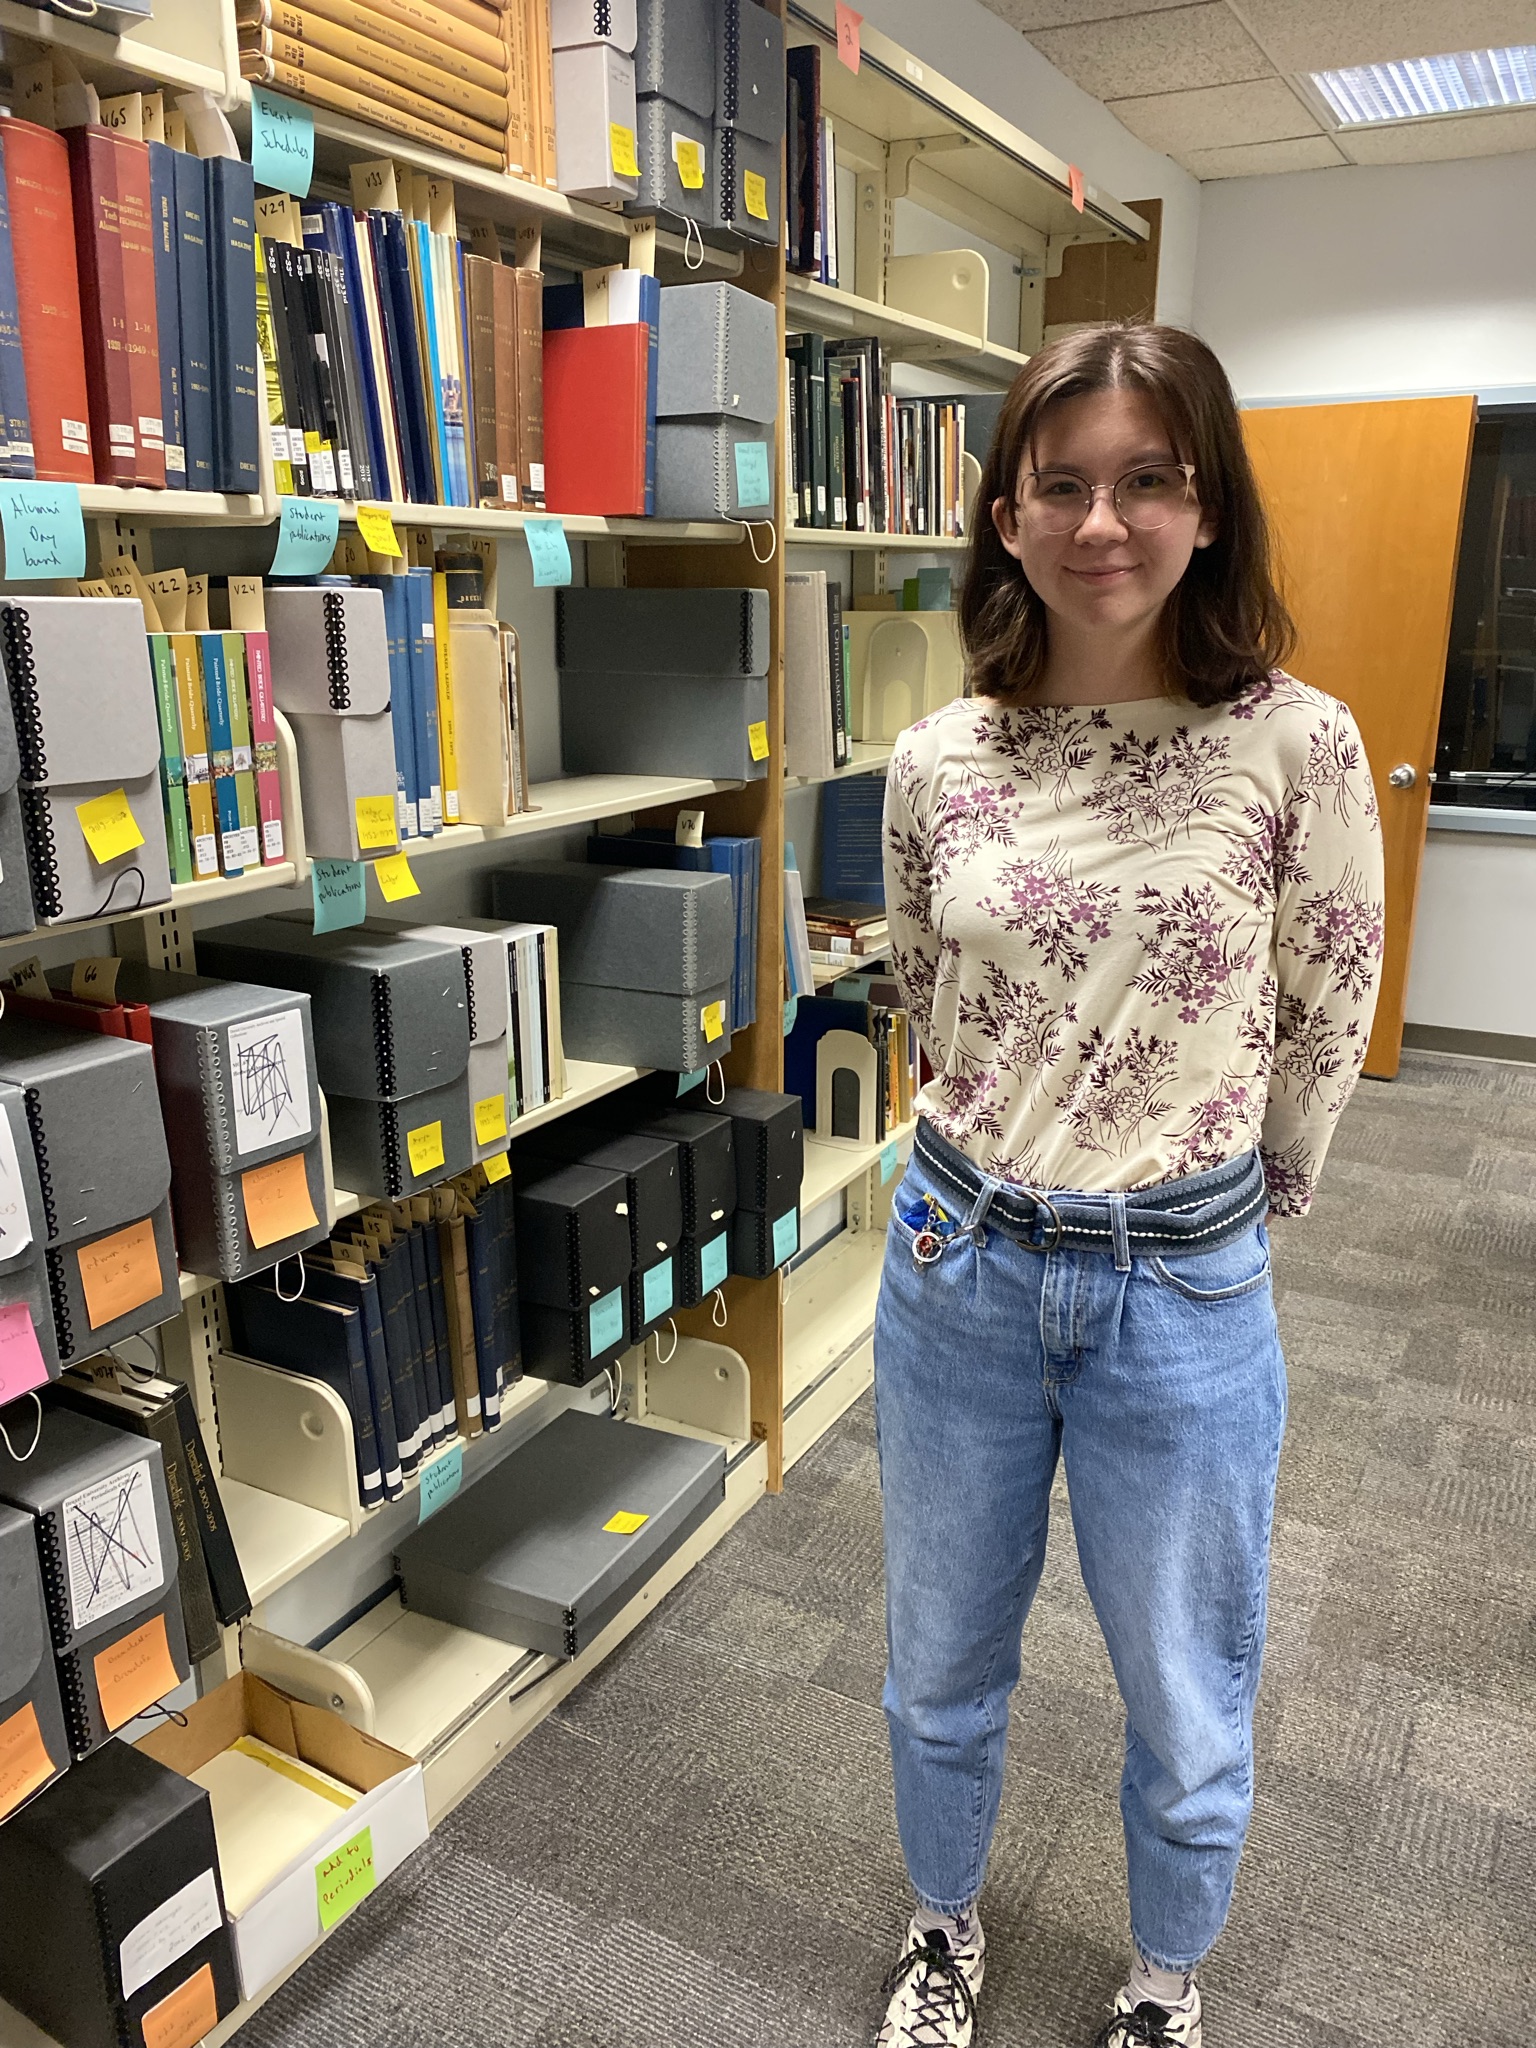 Sophia Stutte stands next to archival items on a bookshelf.